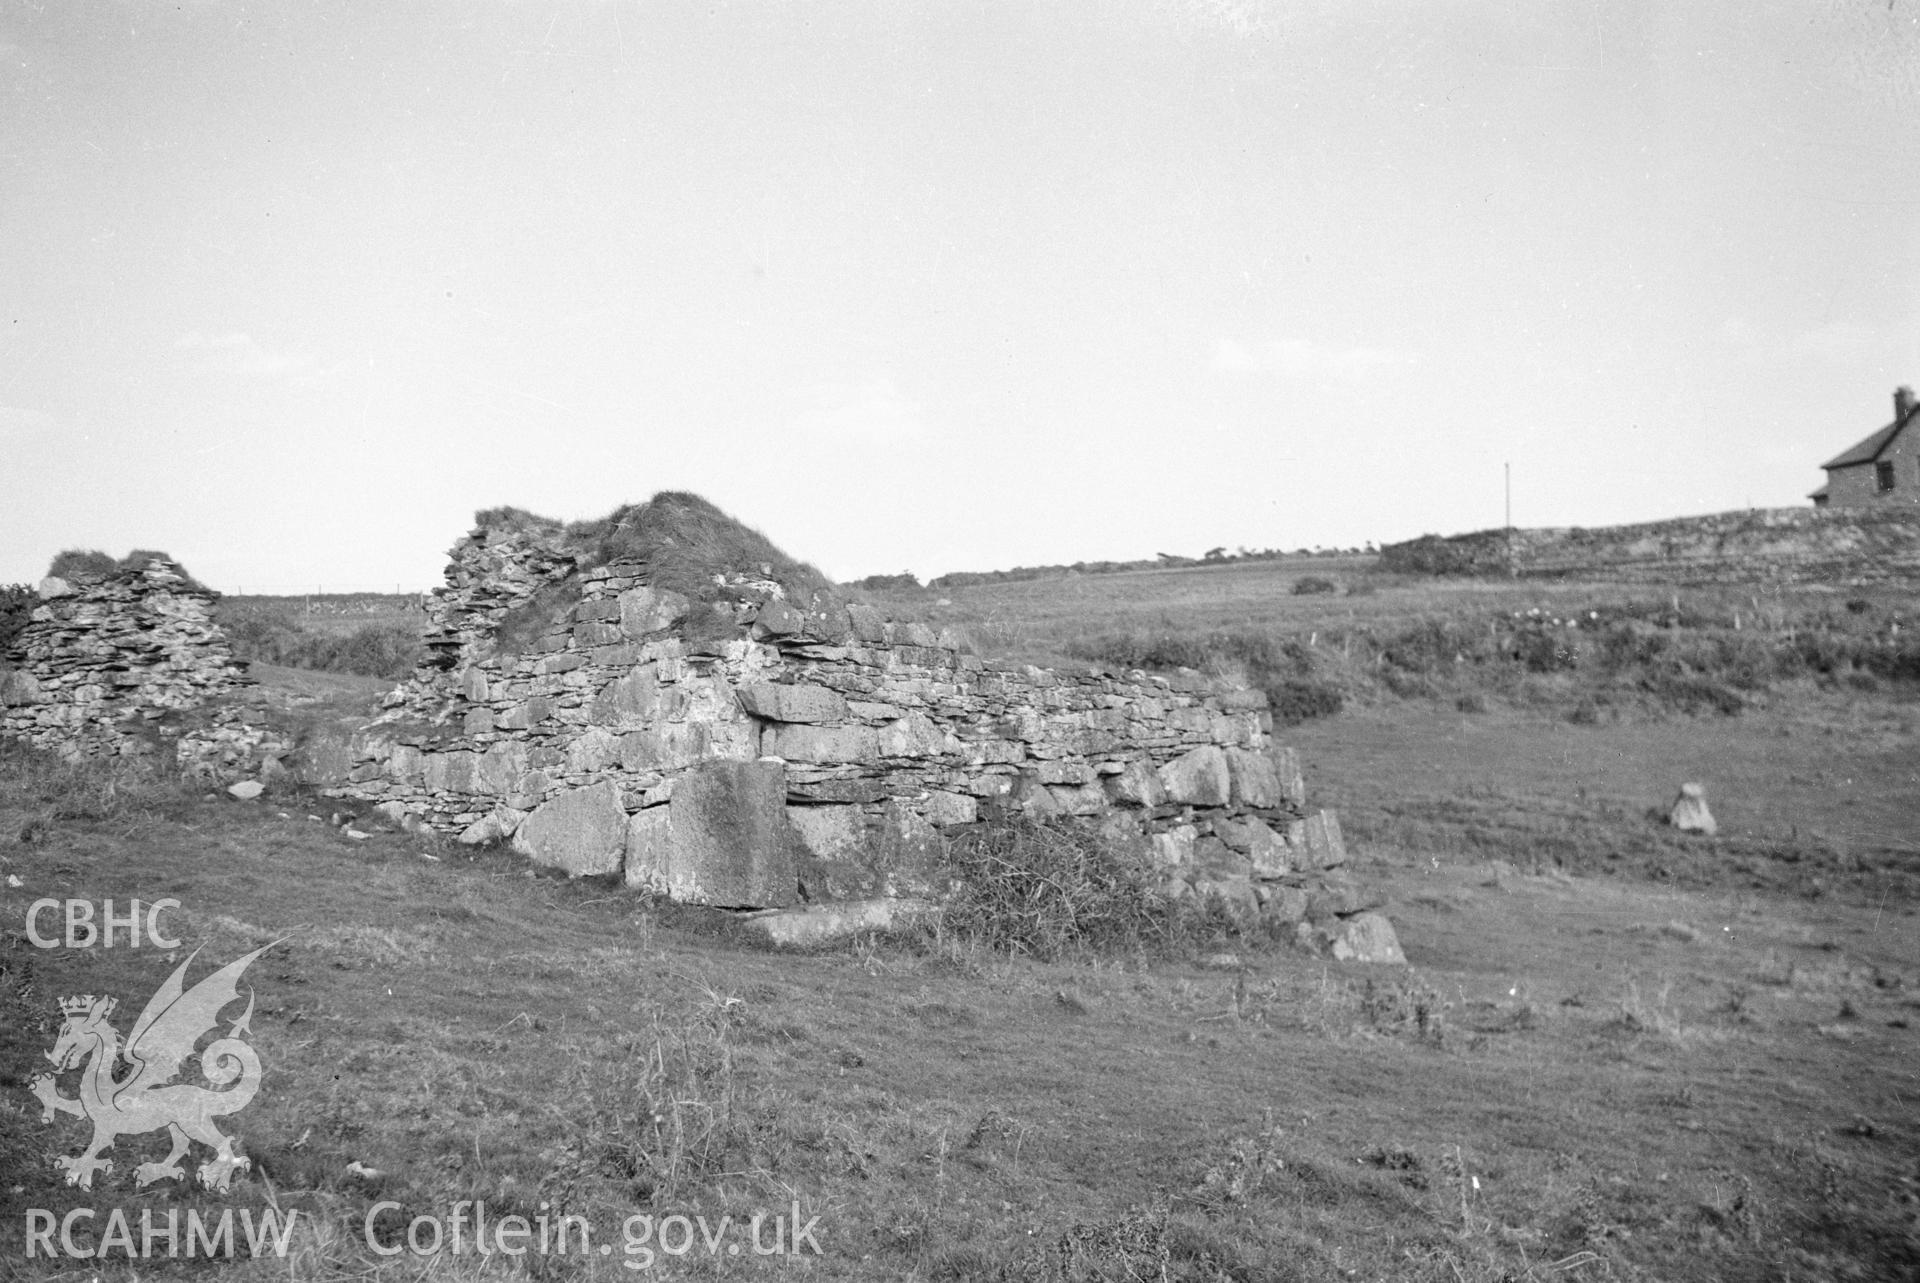 Digital copy of a nitrate negative showing a view of the ruins of St Quintin's Castle taken by Leonard Monroe.